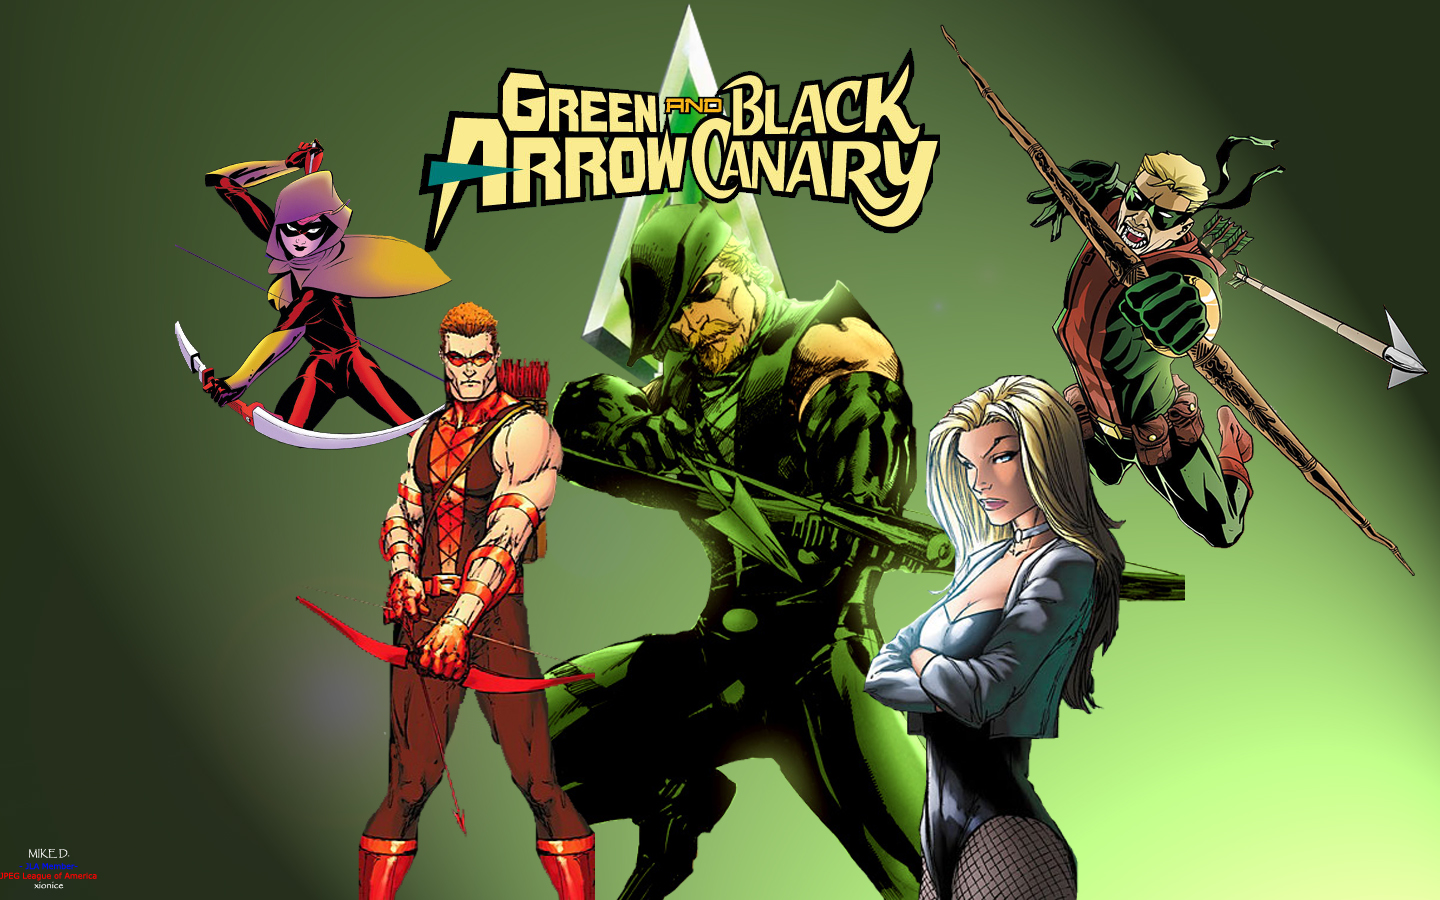 When Will We See The Green Arrow Family In New Entertainment